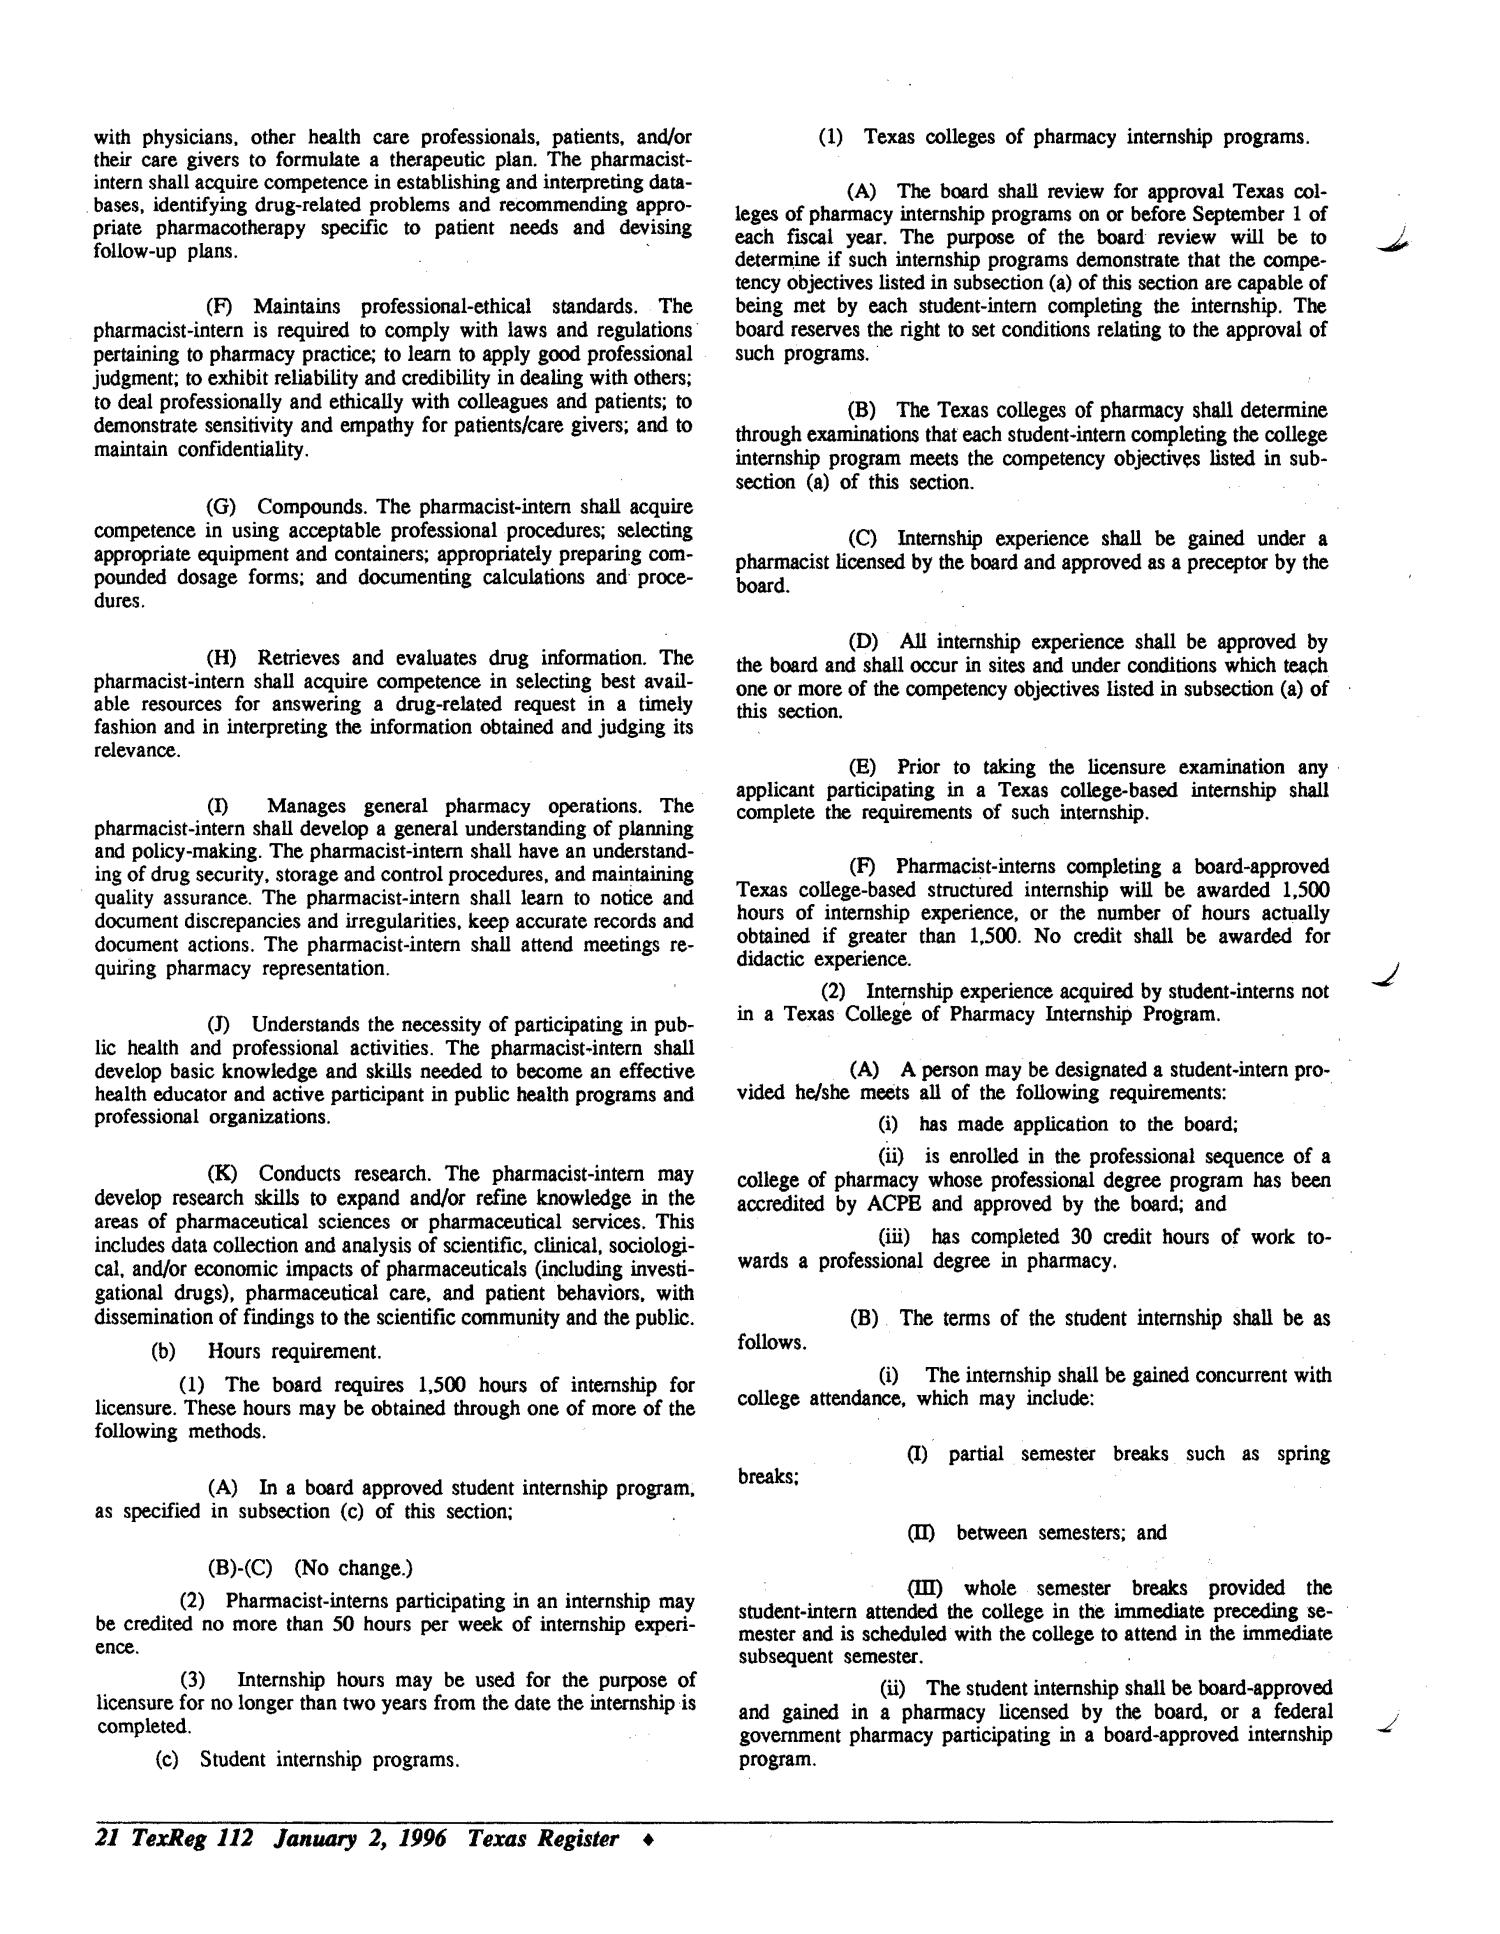 Texas Register, Volume 21, Number 1, (Part II) Pages 105-178, January 2, 1996
                                                
                                                    112
                                                